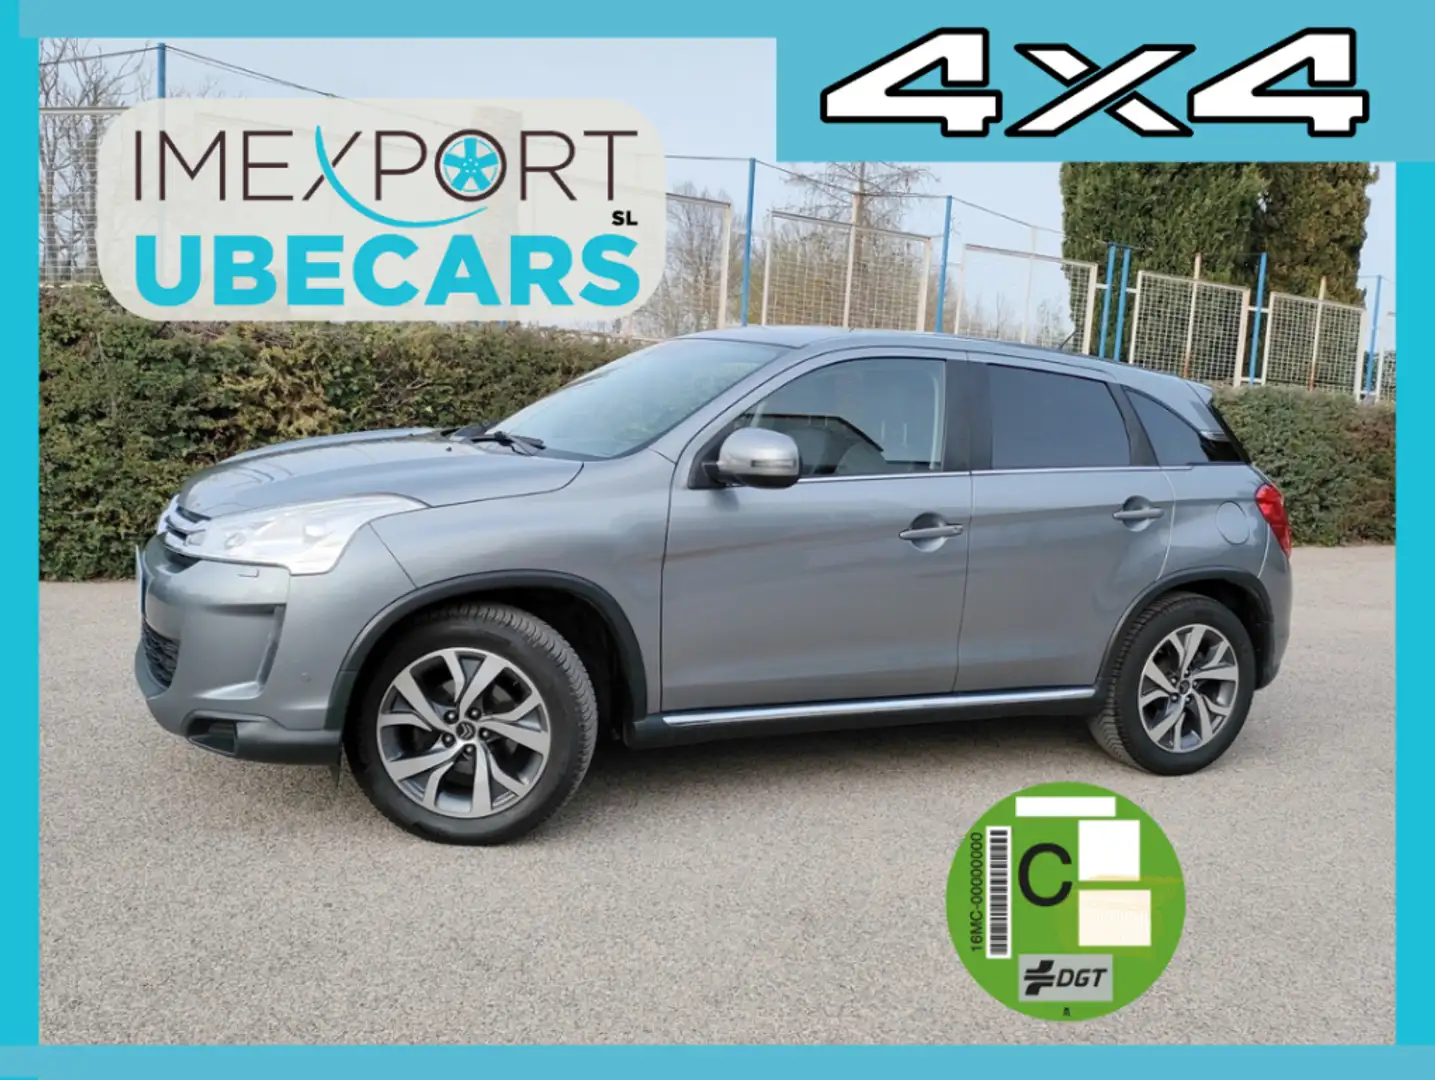 Citroen C4 Aircross 1.6HDI S&S Exclusive 4WD 115 siva - 1